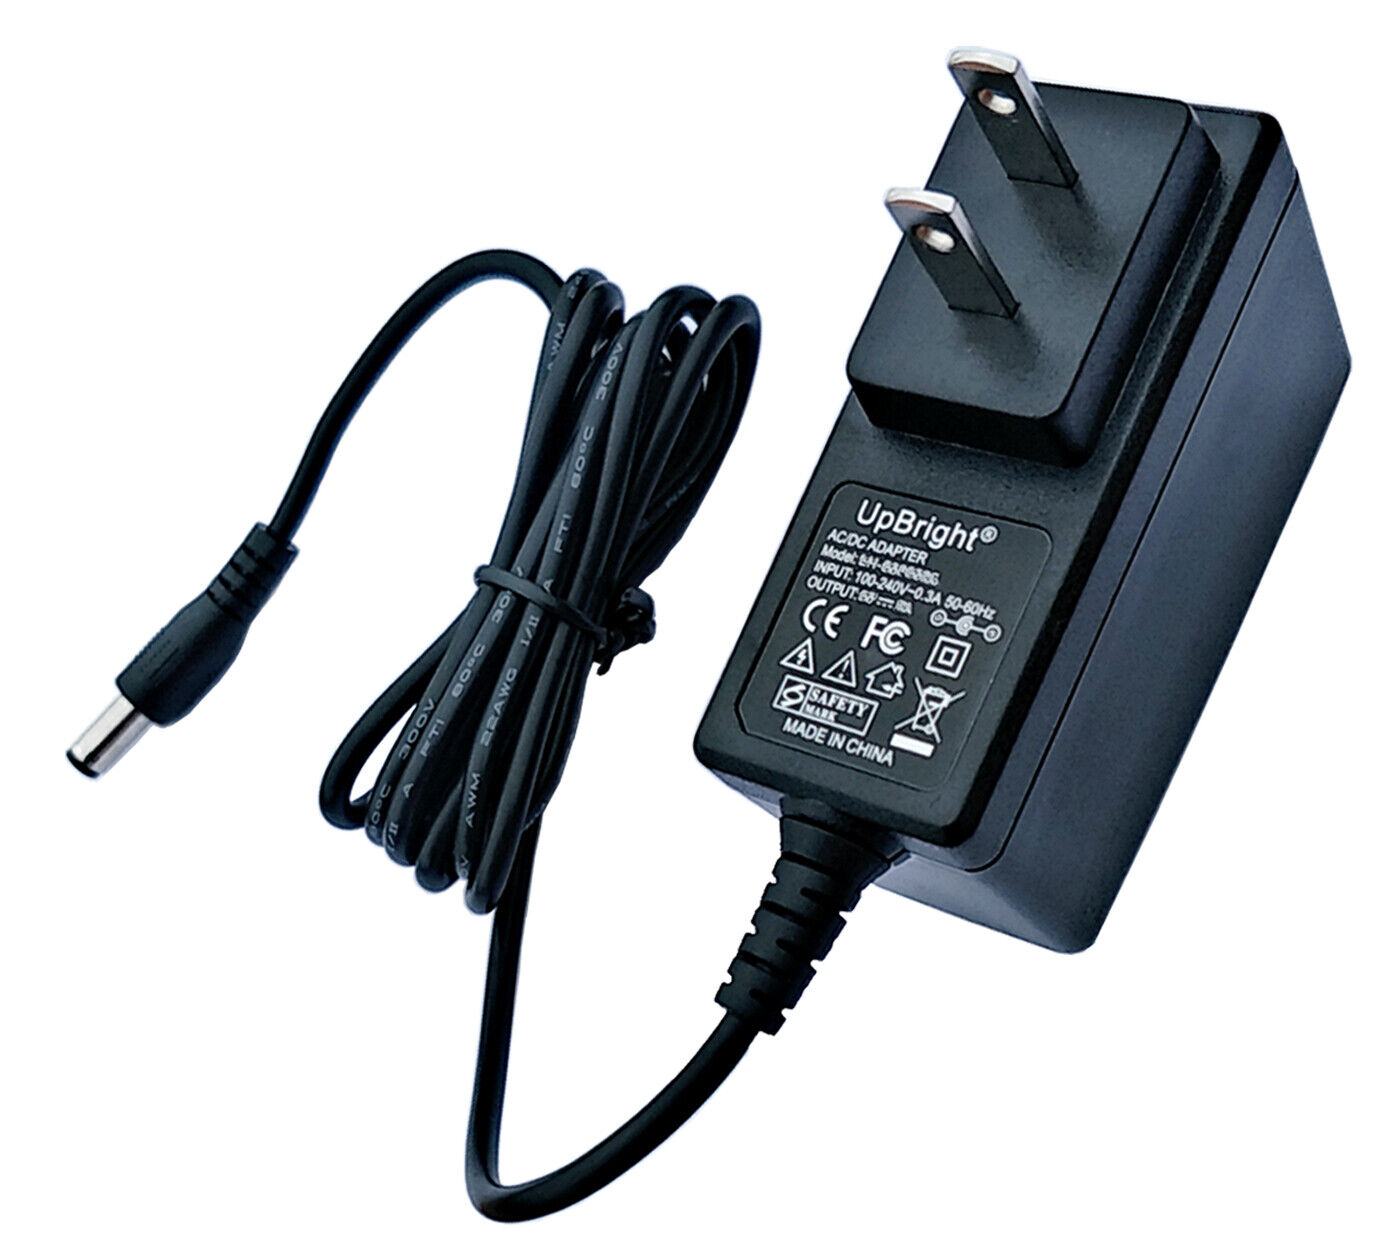 9V AC / DC Adapter For Crosley Cruiser Portable Turntable Record Player CR8005A